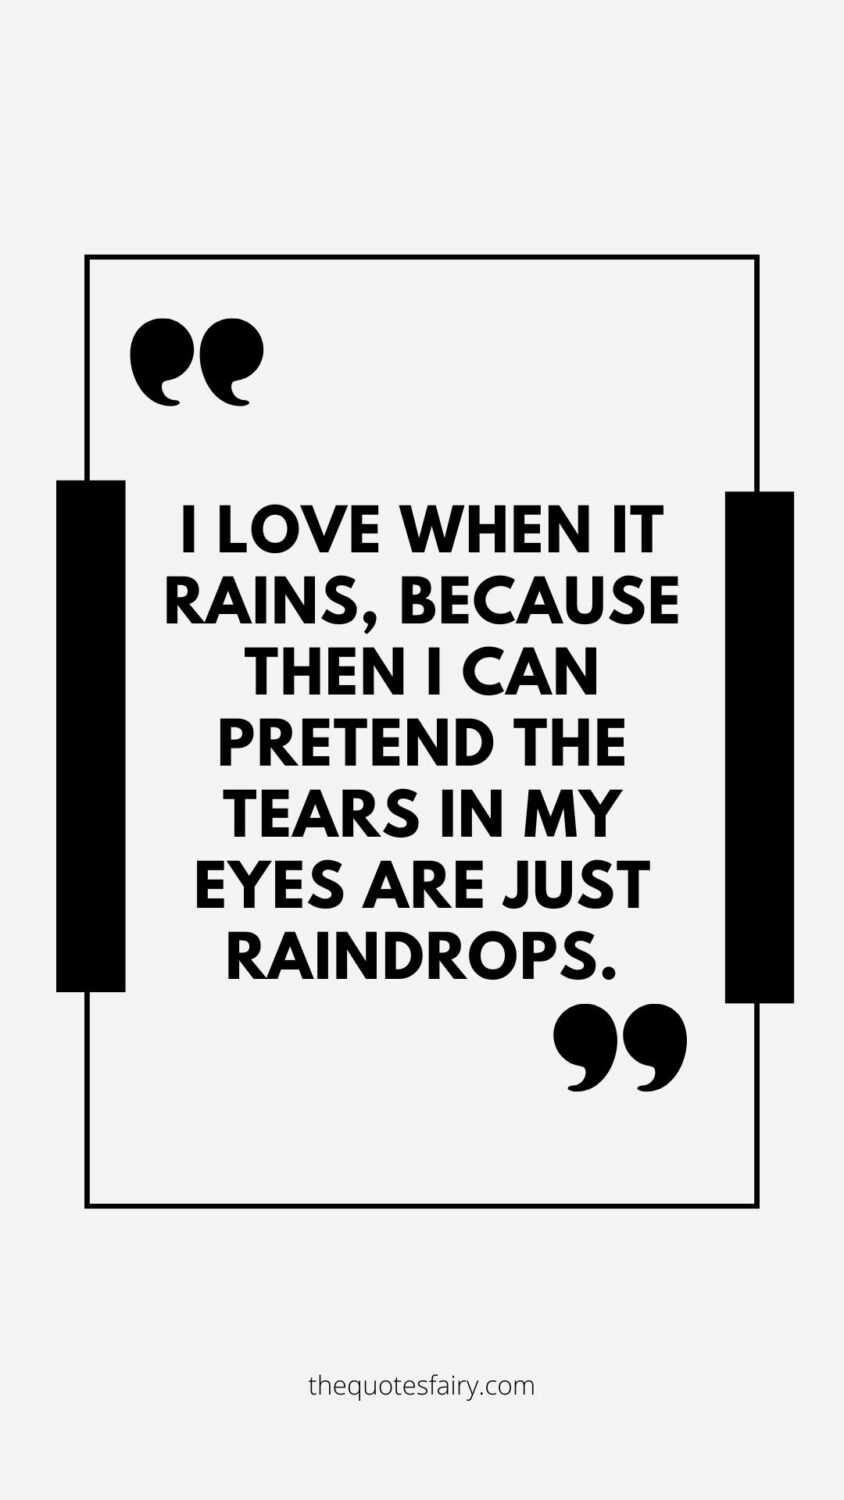 Did you ever notice that the pitter-patter of the raindrops makes you sluggish and turns your mood down? These sarcastic rain quotes are here to boost your mood and offer some relief when, hey, we all might feel this way about rain sometimes